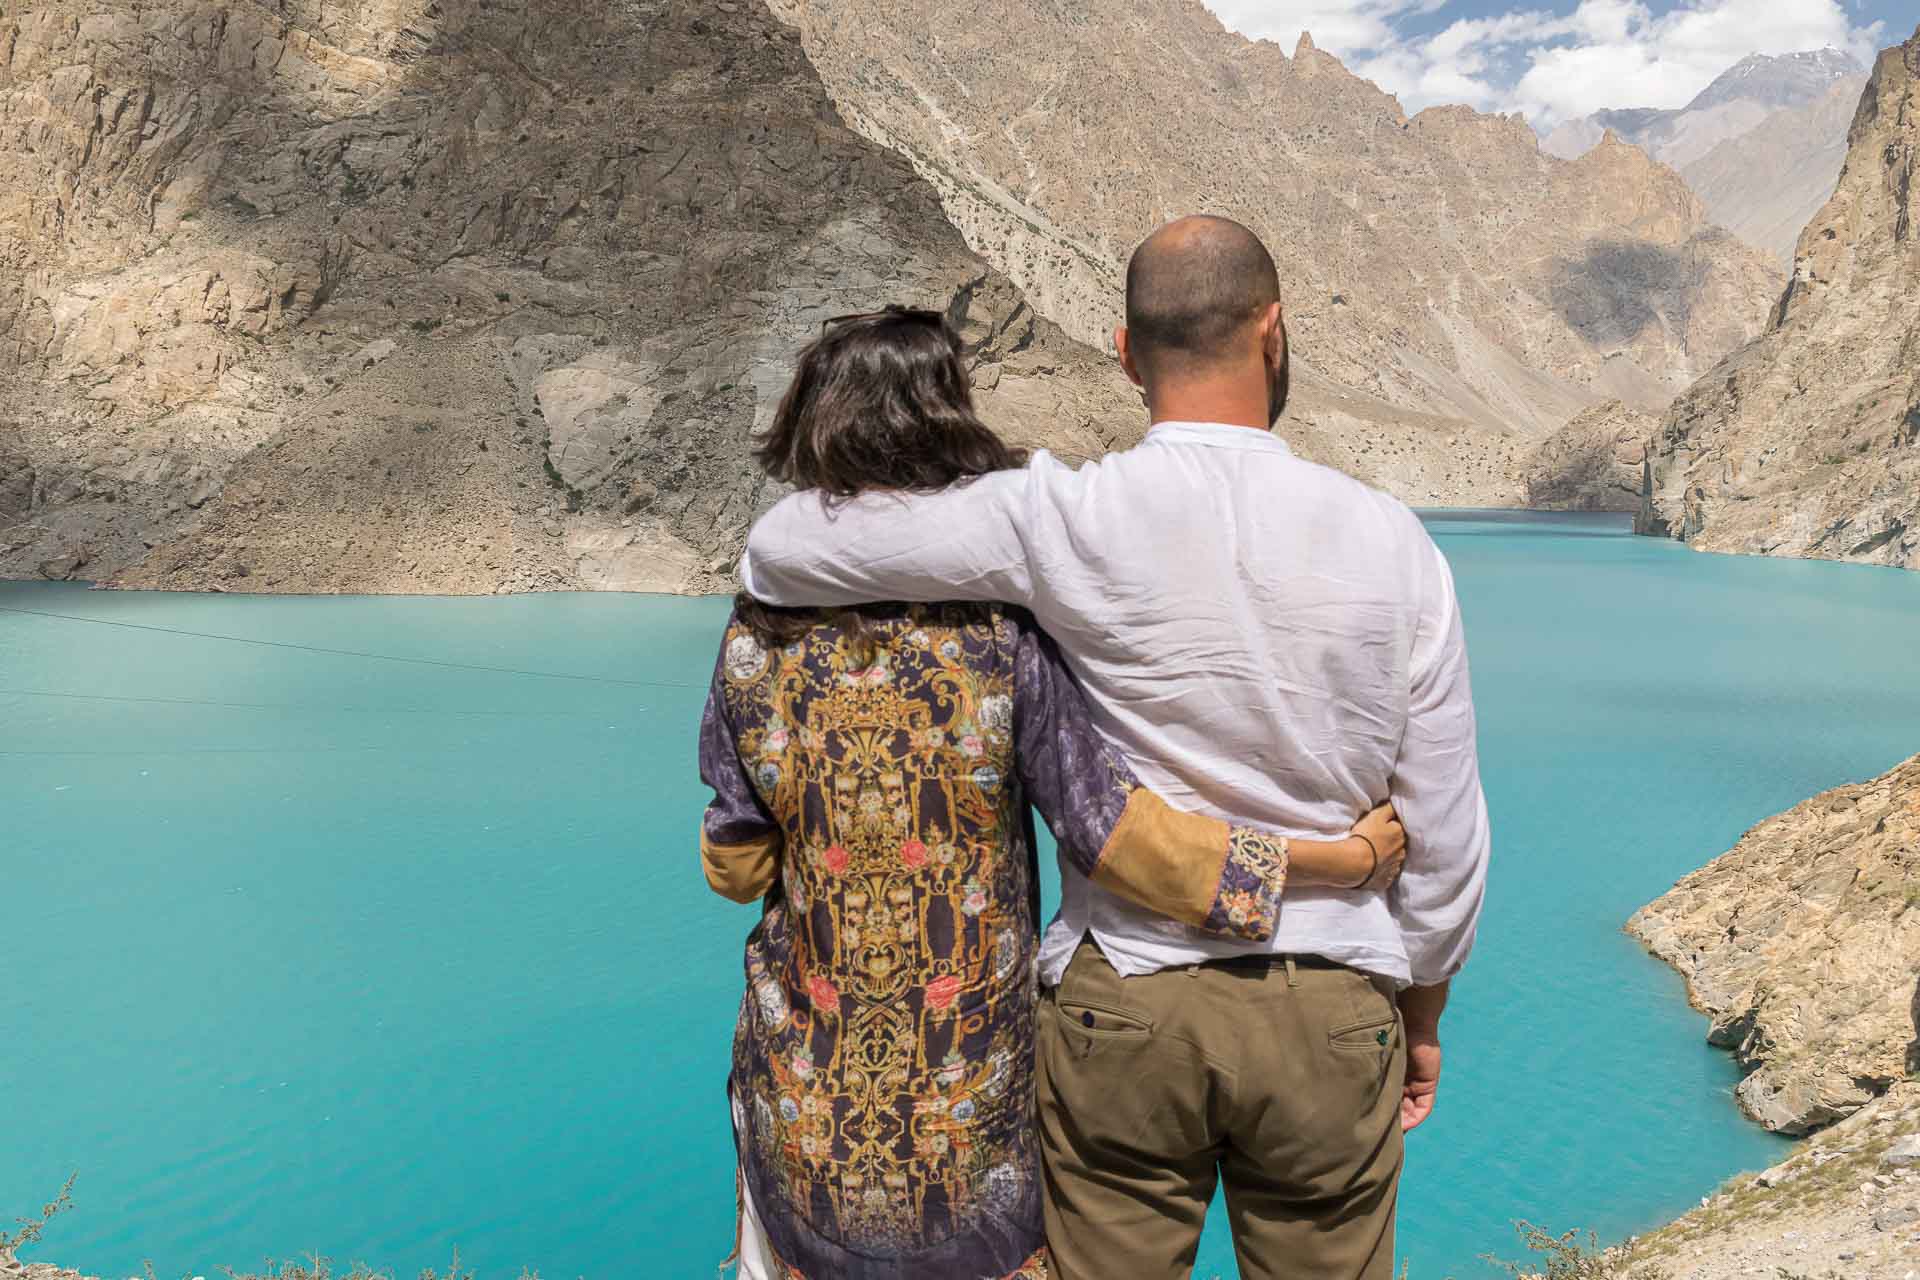 Tiago and Fernanda looking at the turquoise blue water of the Attabad Lake